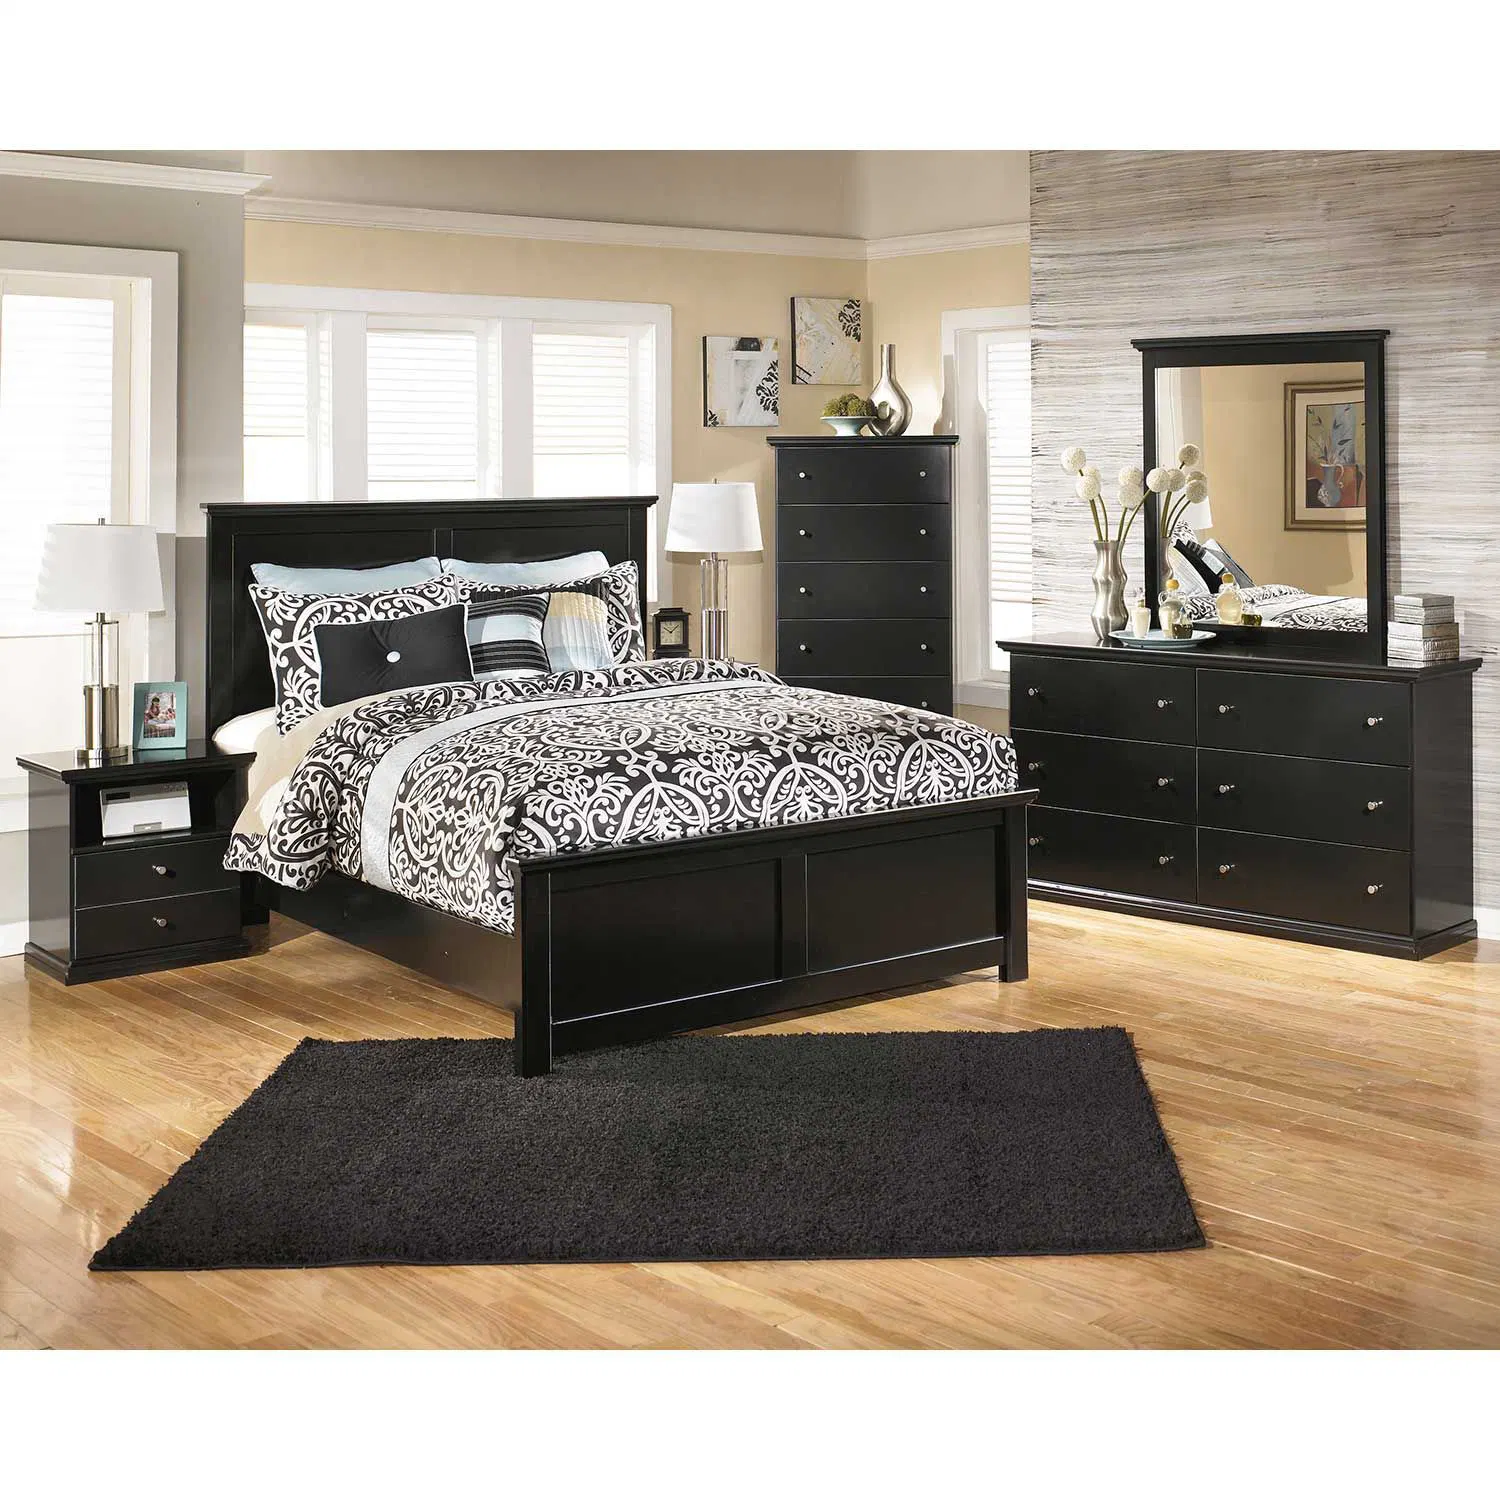 China Wholesale/Supplier Black Painted Wooden 5 Piece Bedroom Set Furniture Include Single Double King Sized Bed Storage Cabinet Making up Vantity Dressing Table